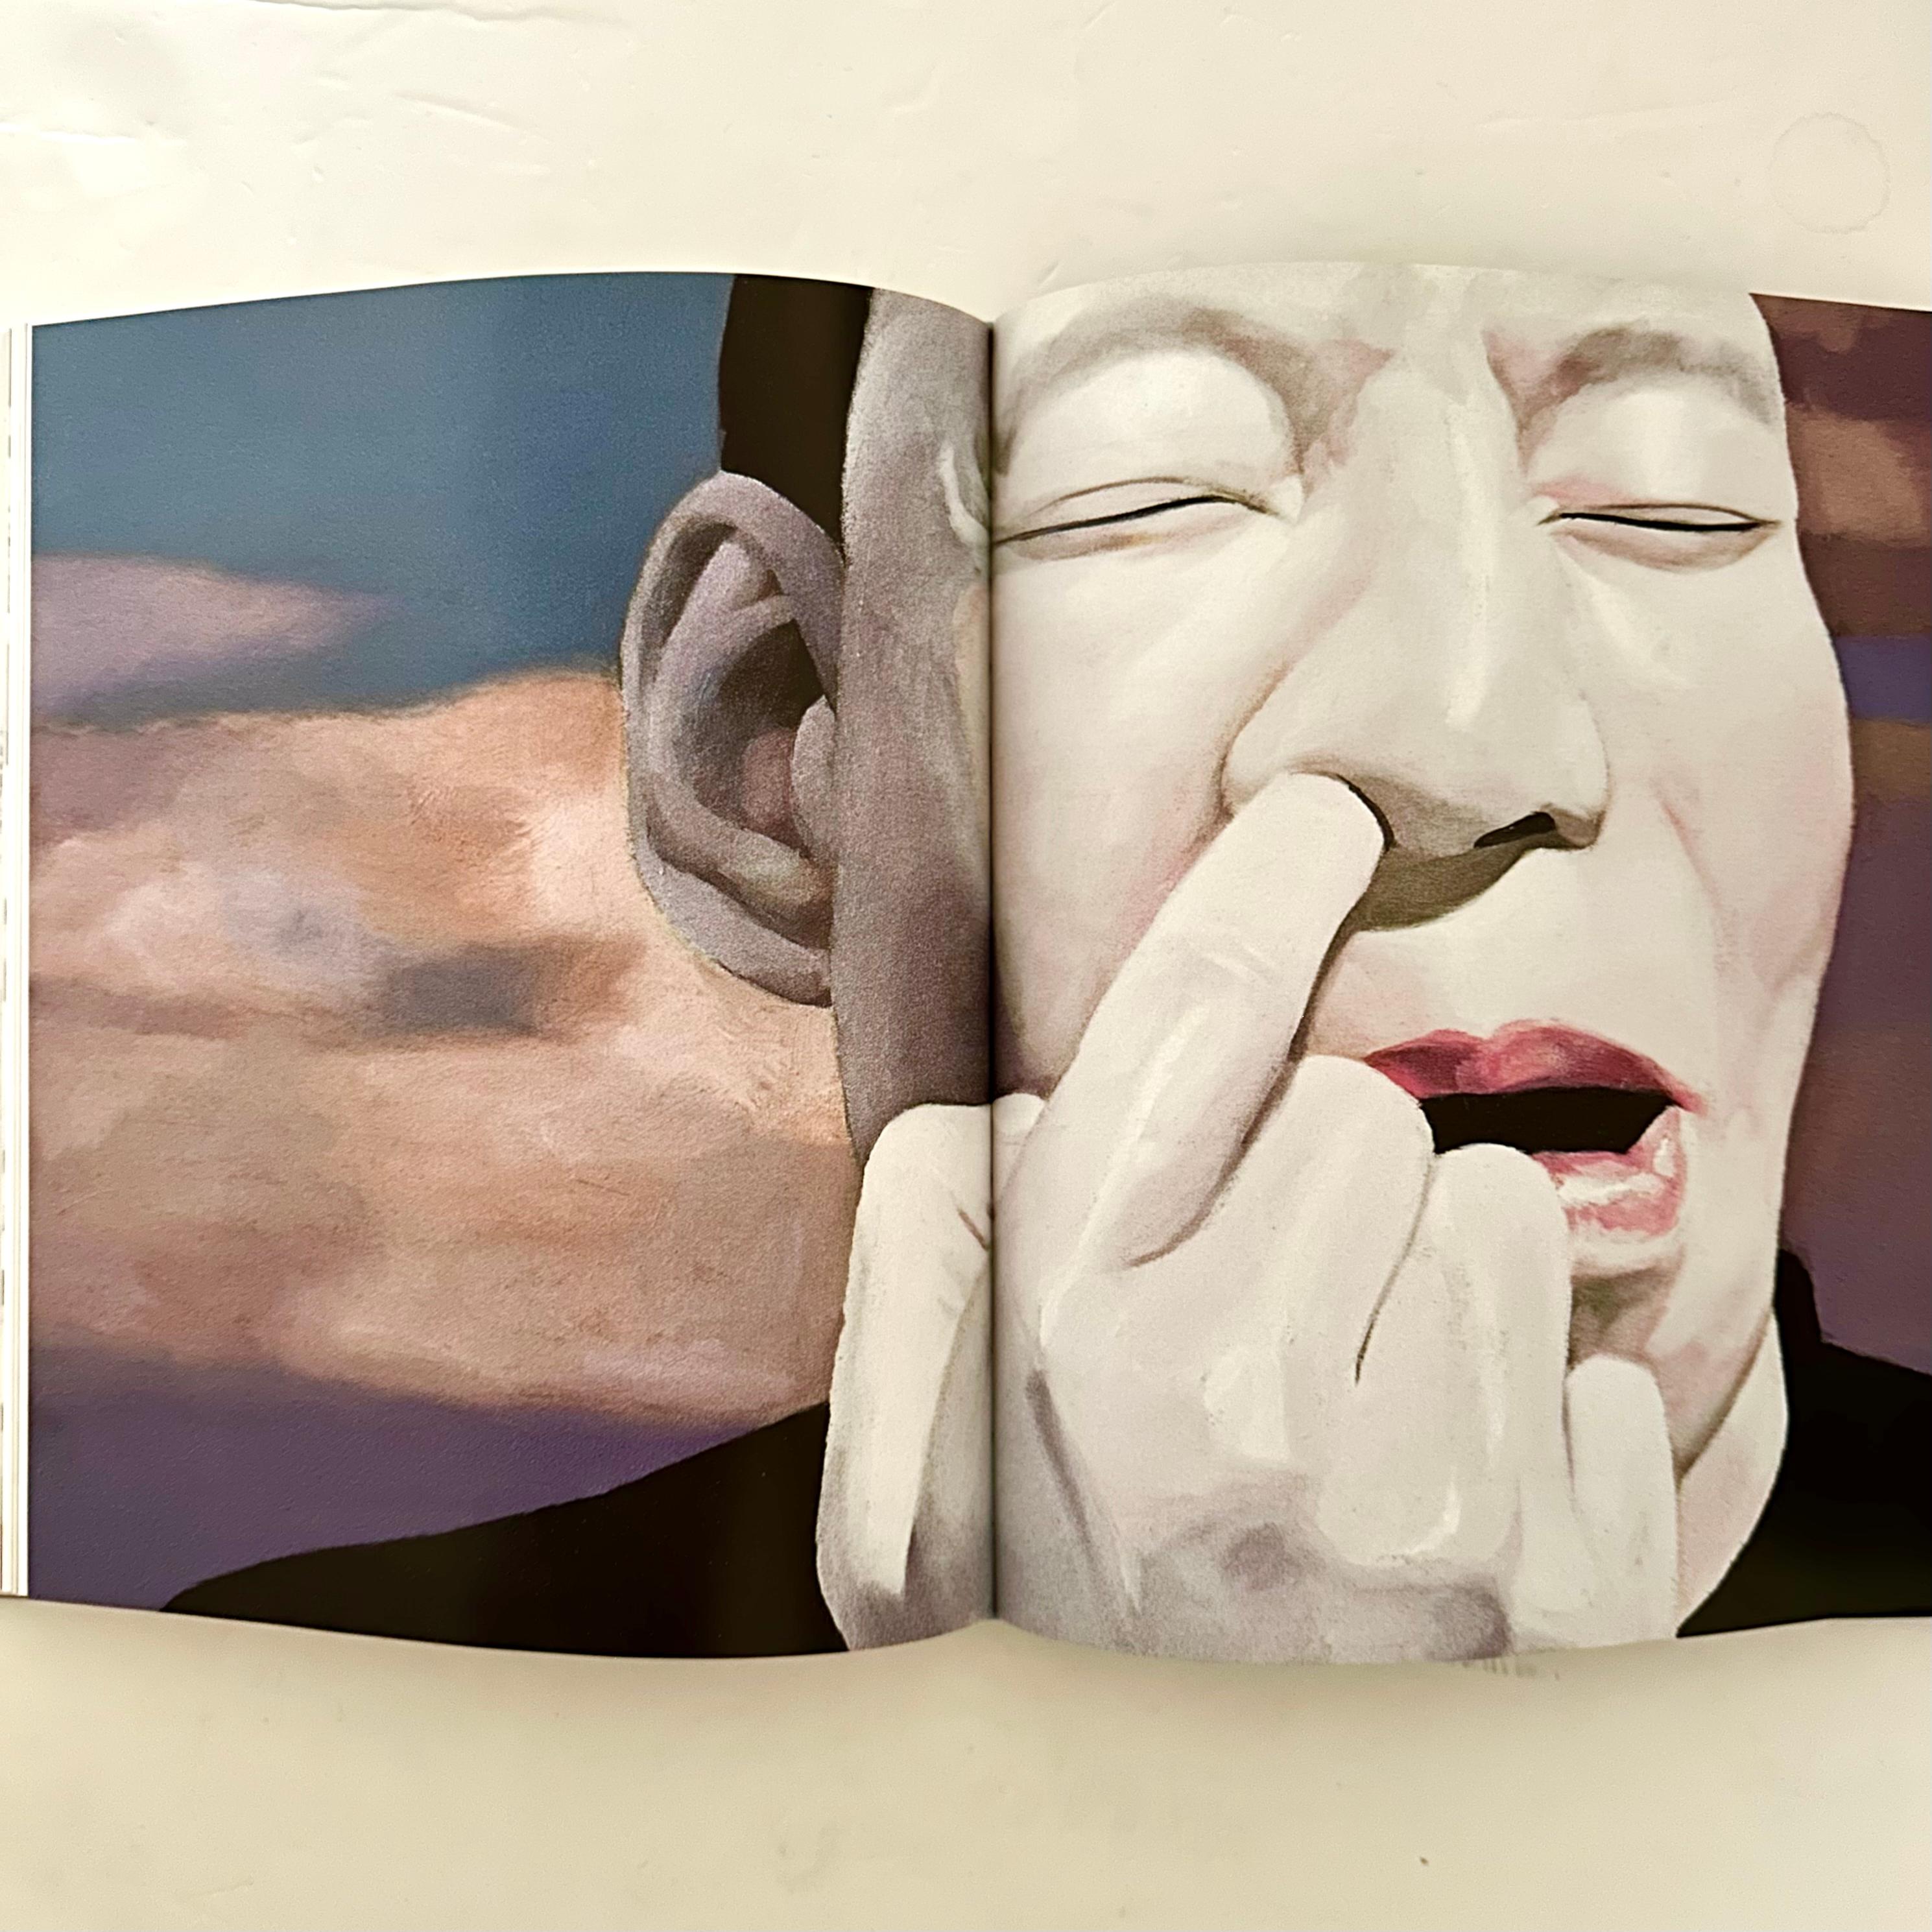 Published by Fondation Cartier Pour l’Art Contemporain, 1st edition, Paris, 2012. Hardback with  English and French text, Chinese titles for artworks. 

130 colour and black and white productions. 

Yue Minjun’s red-faced laughing figures reinvent